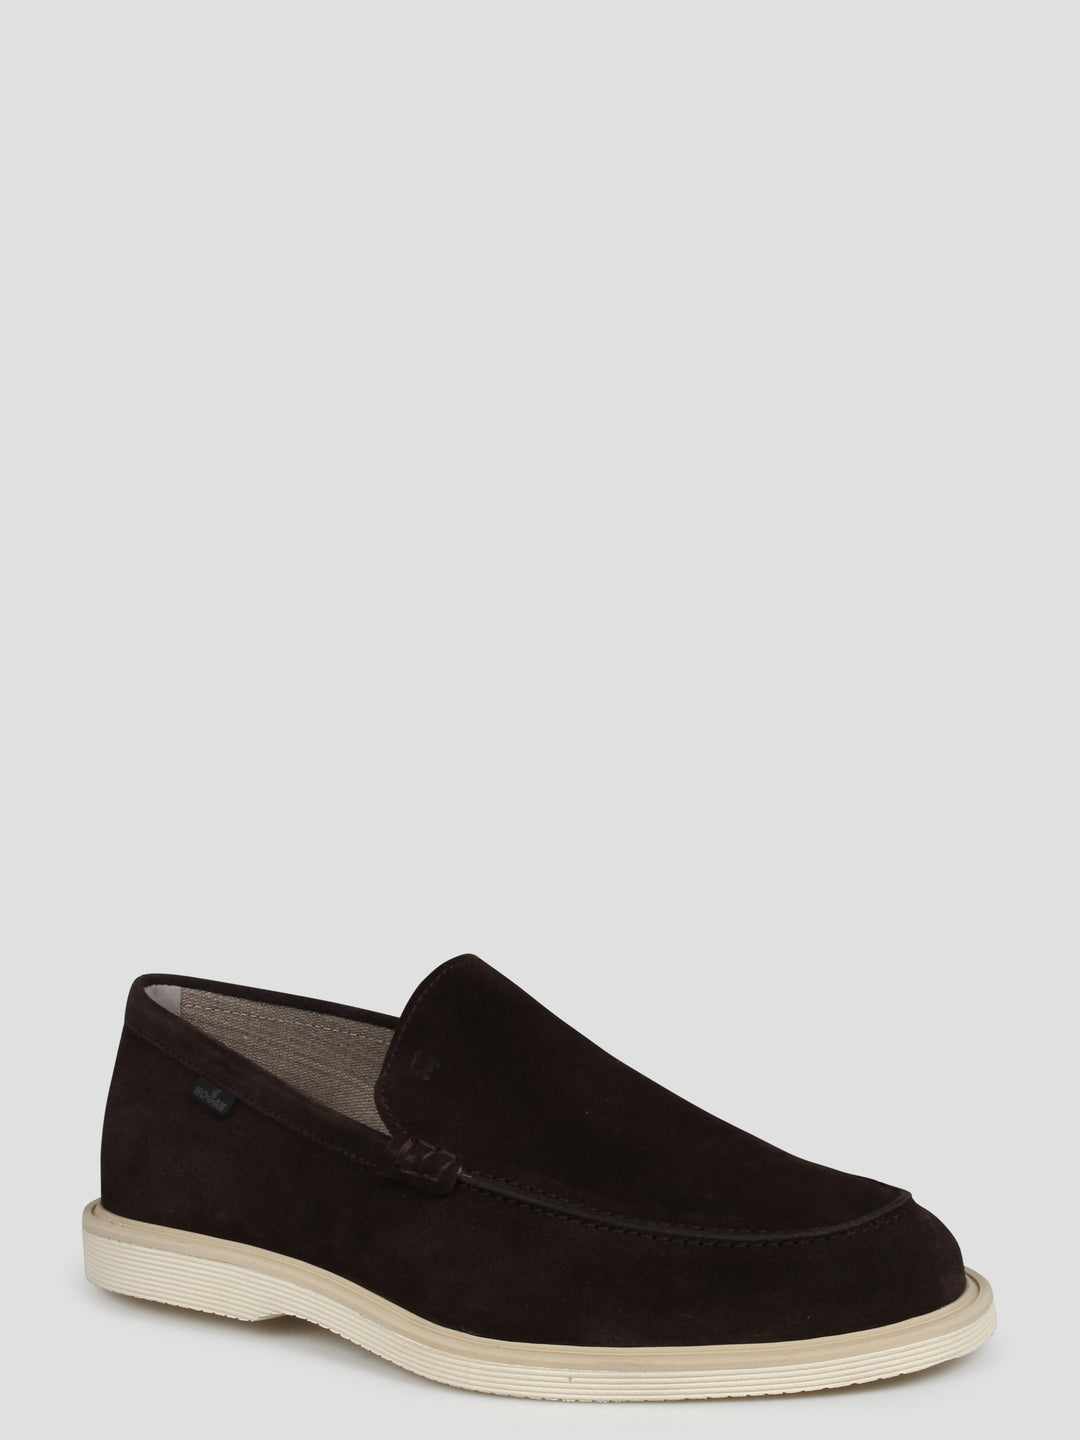 H633 suede loafers